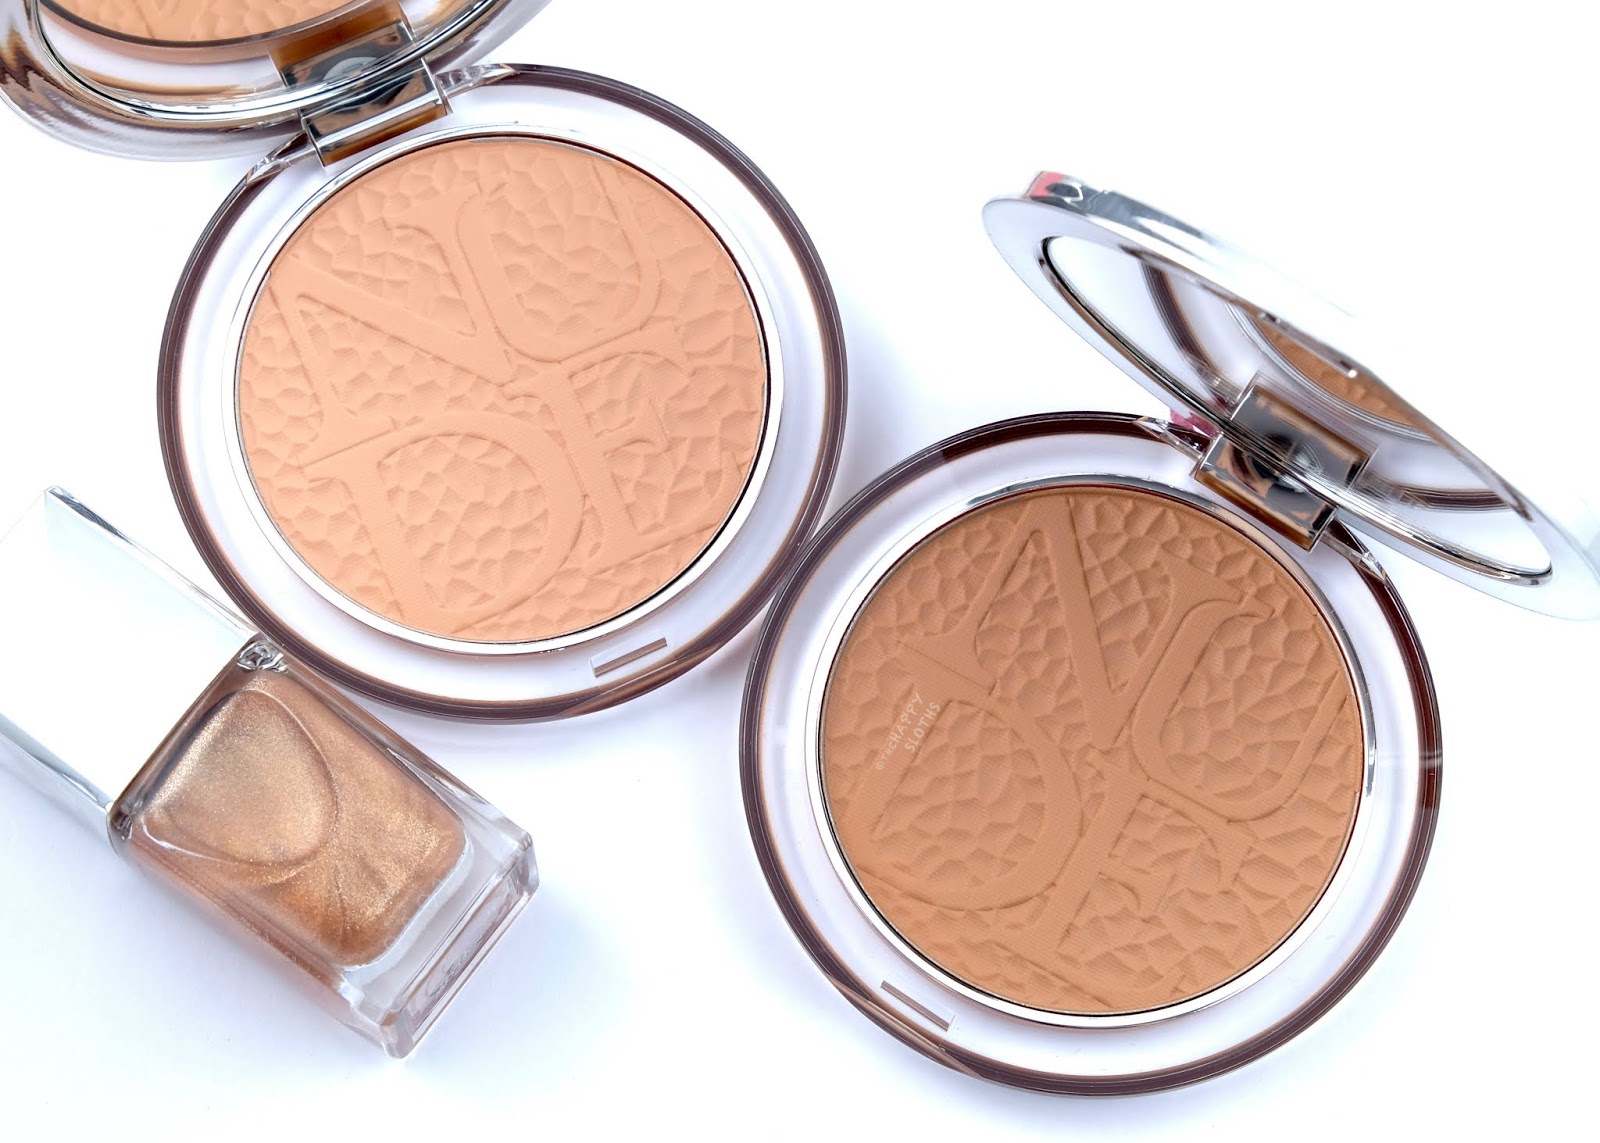 Dior Summer 2019 Wild Earth Collection | Diorskin Mineral Nude Bronze Wild Earth: Review and Swatches